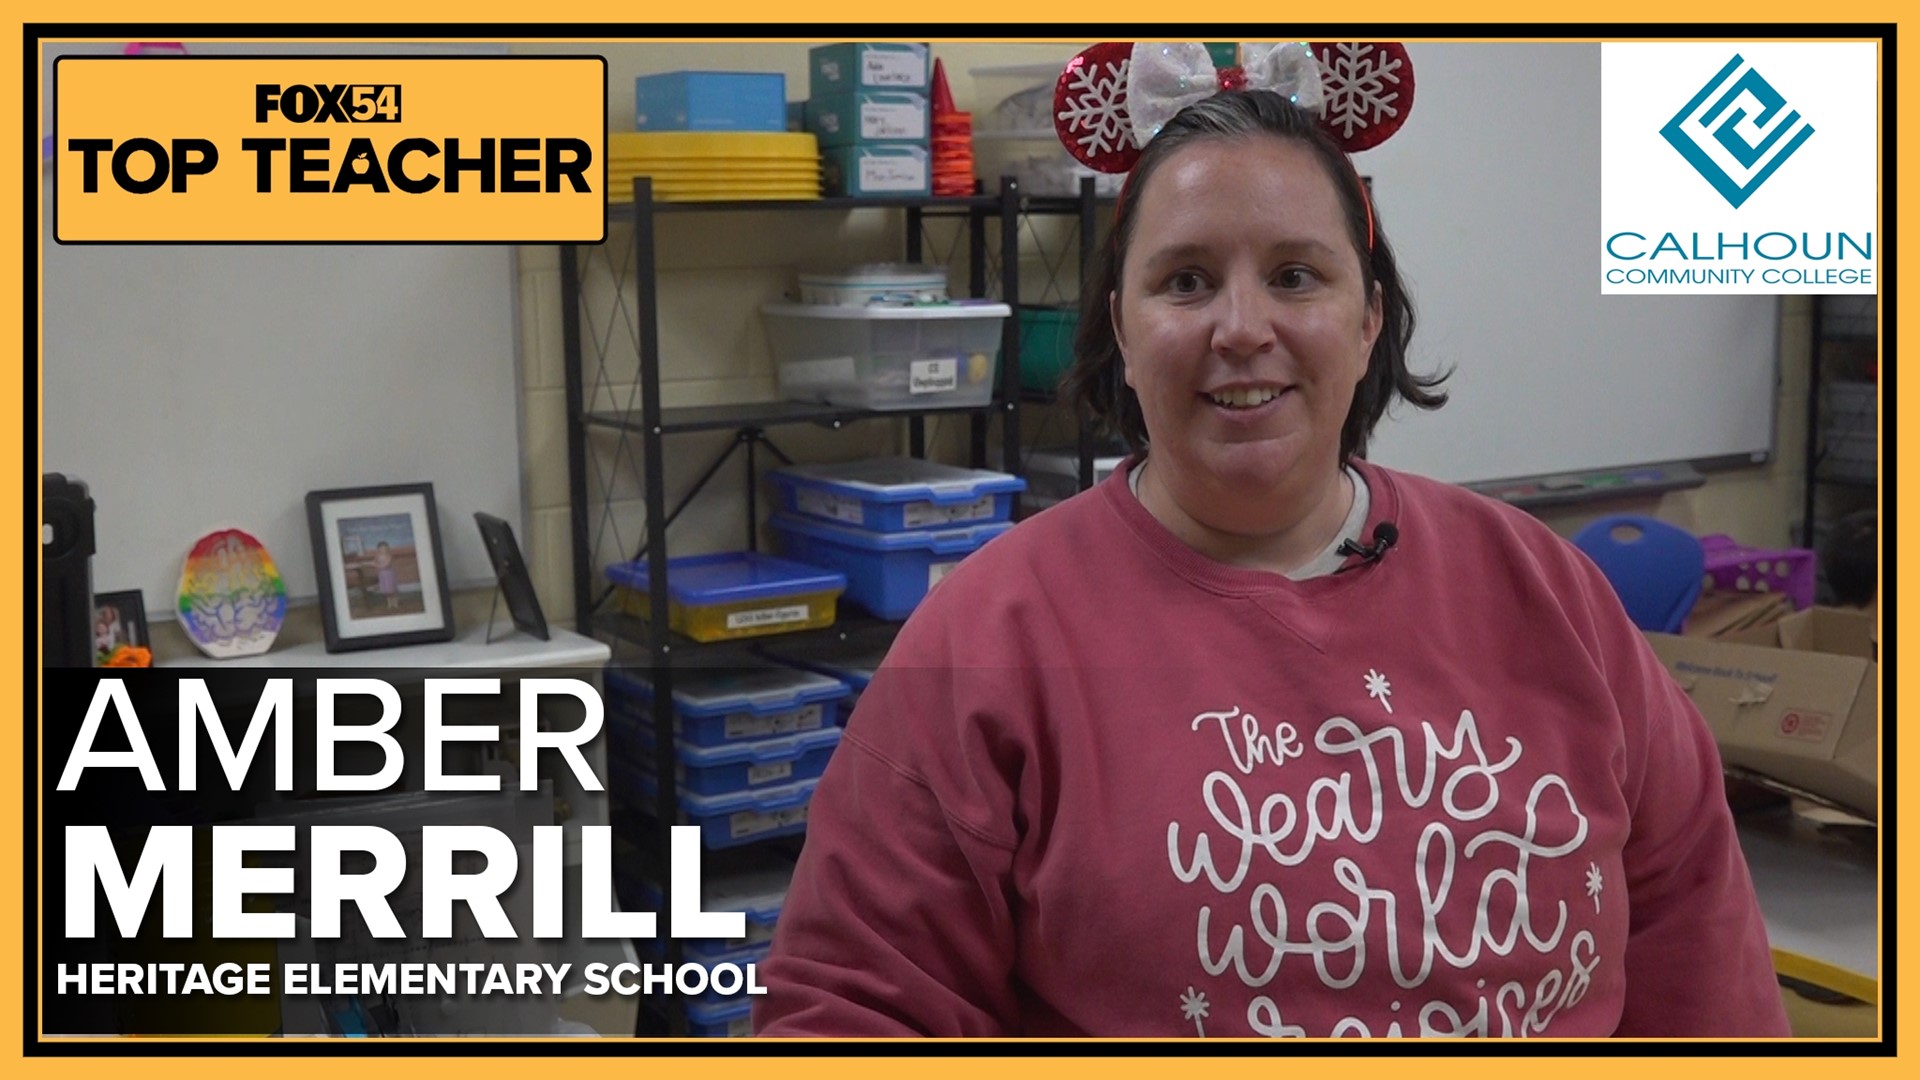 FOX54 Top Teacher Amber Merrill believes resilence and diligence is what gets the job done...but doing so creatively is what keeps the kids attention.